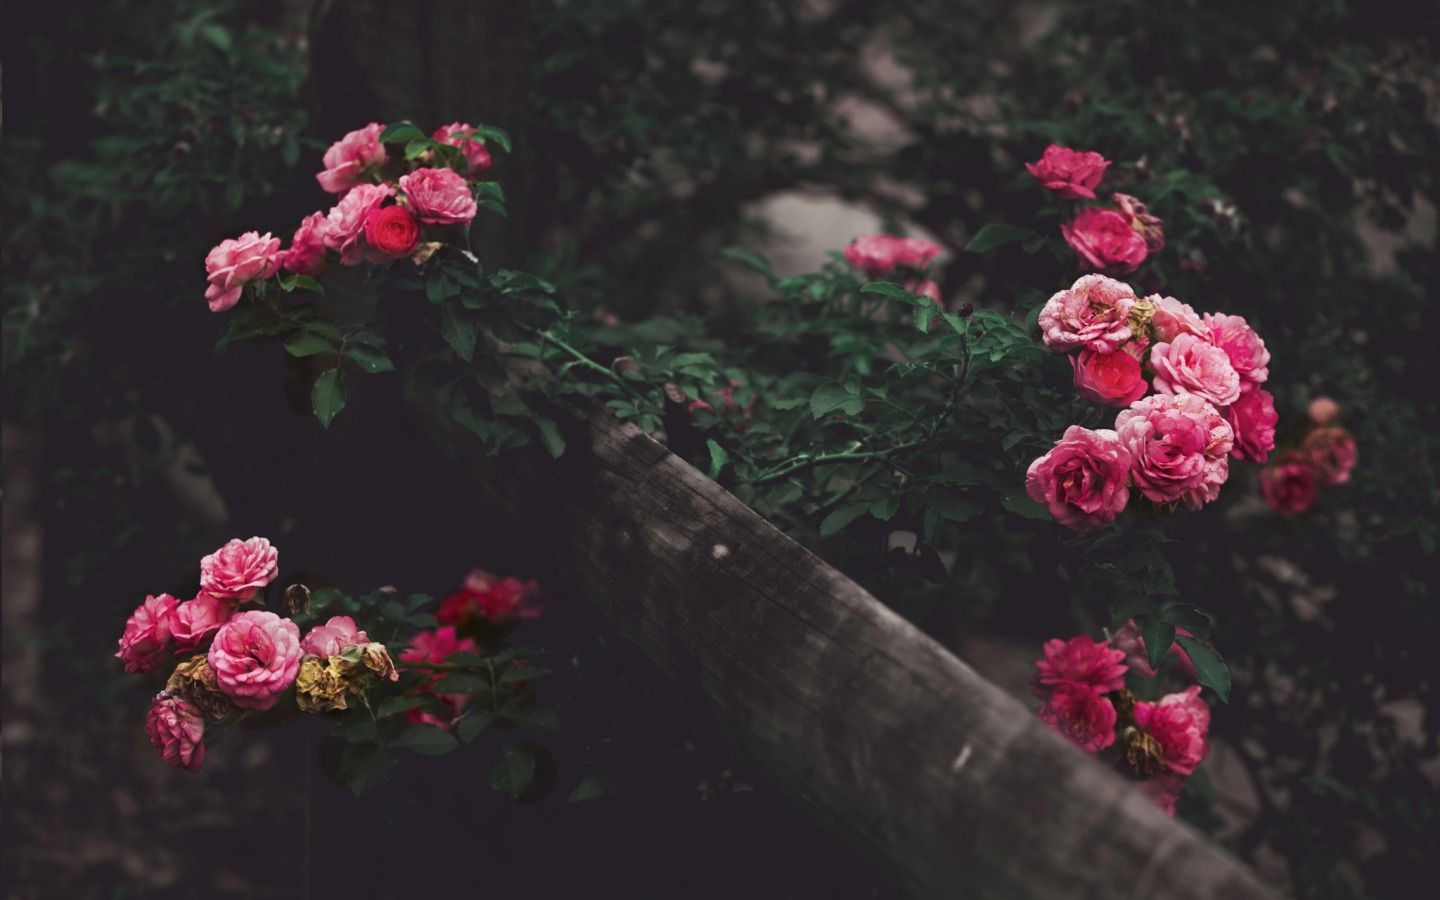 Download wallpaper garden, Roses, the bushes, section flowers in resolution 1440x900